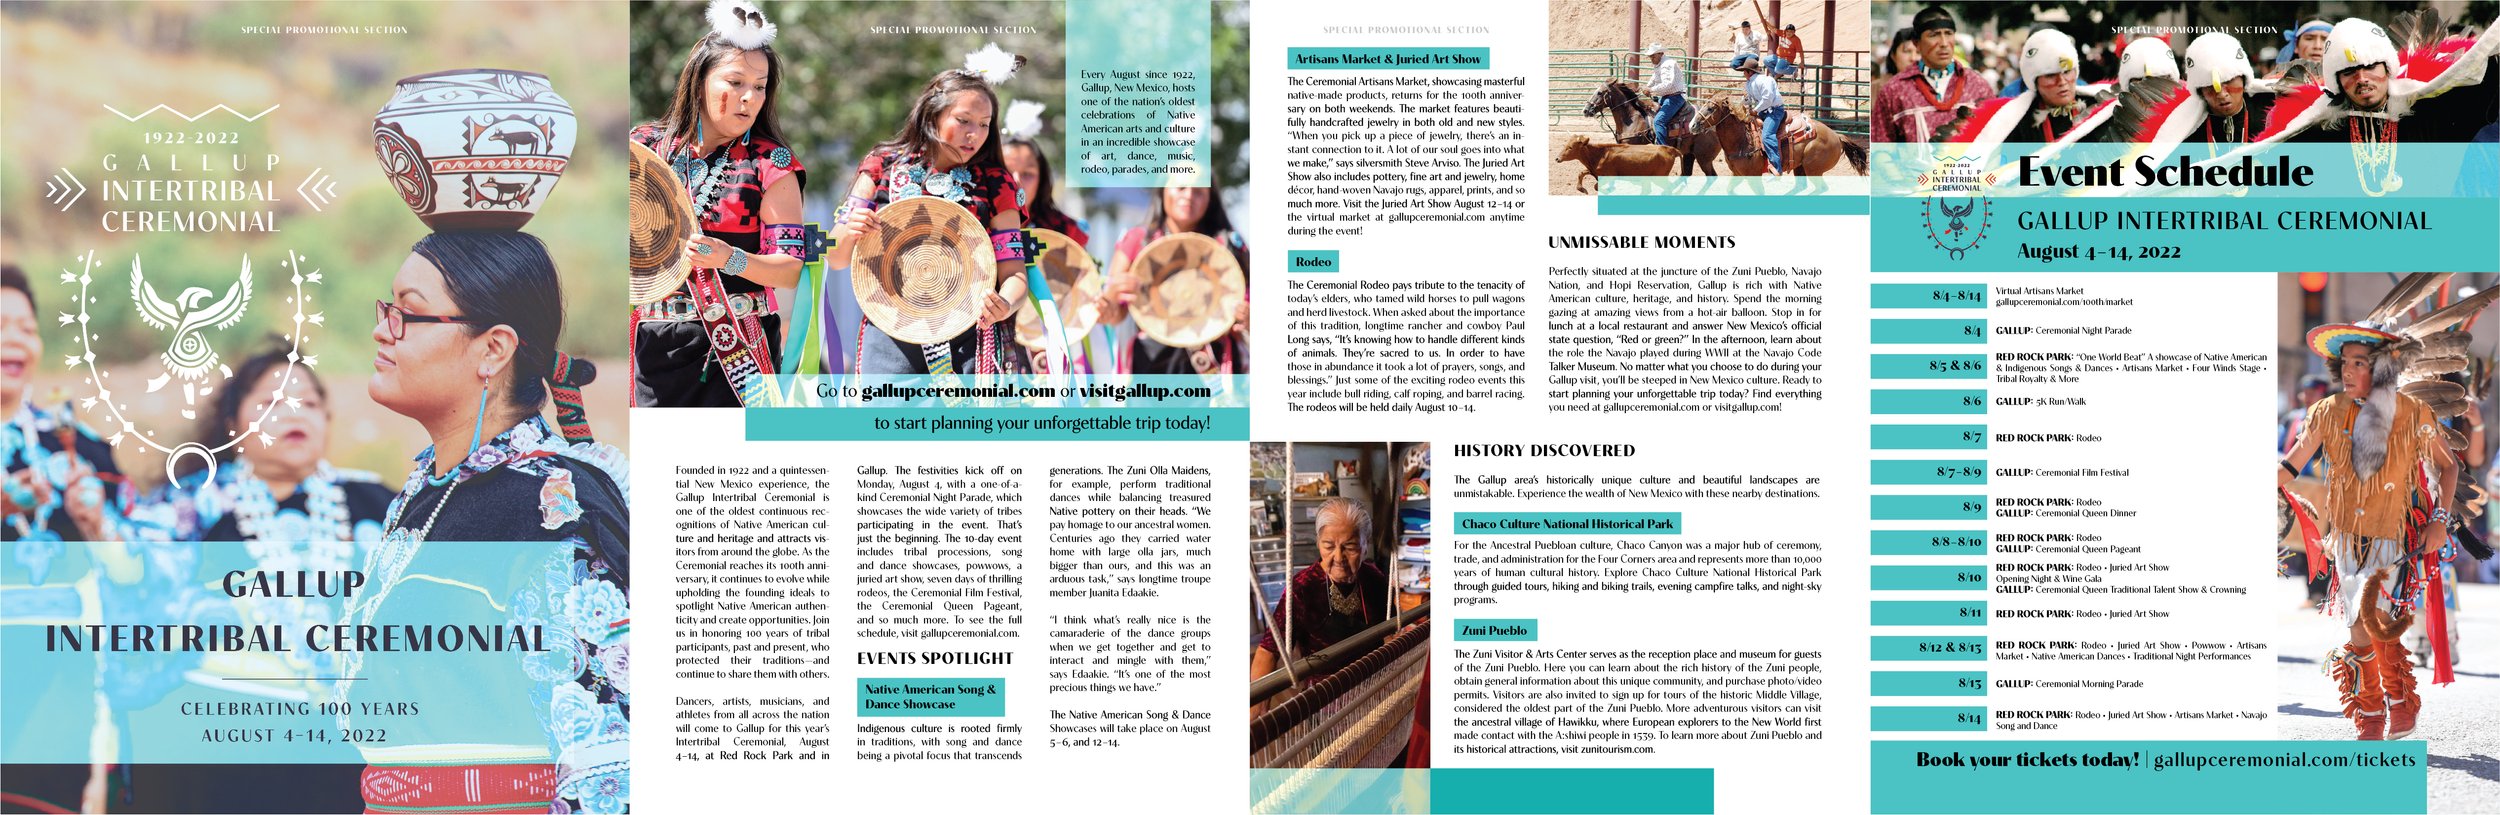 Gallup Intertribal Ceremonial New Mexico Magazine Advertorial